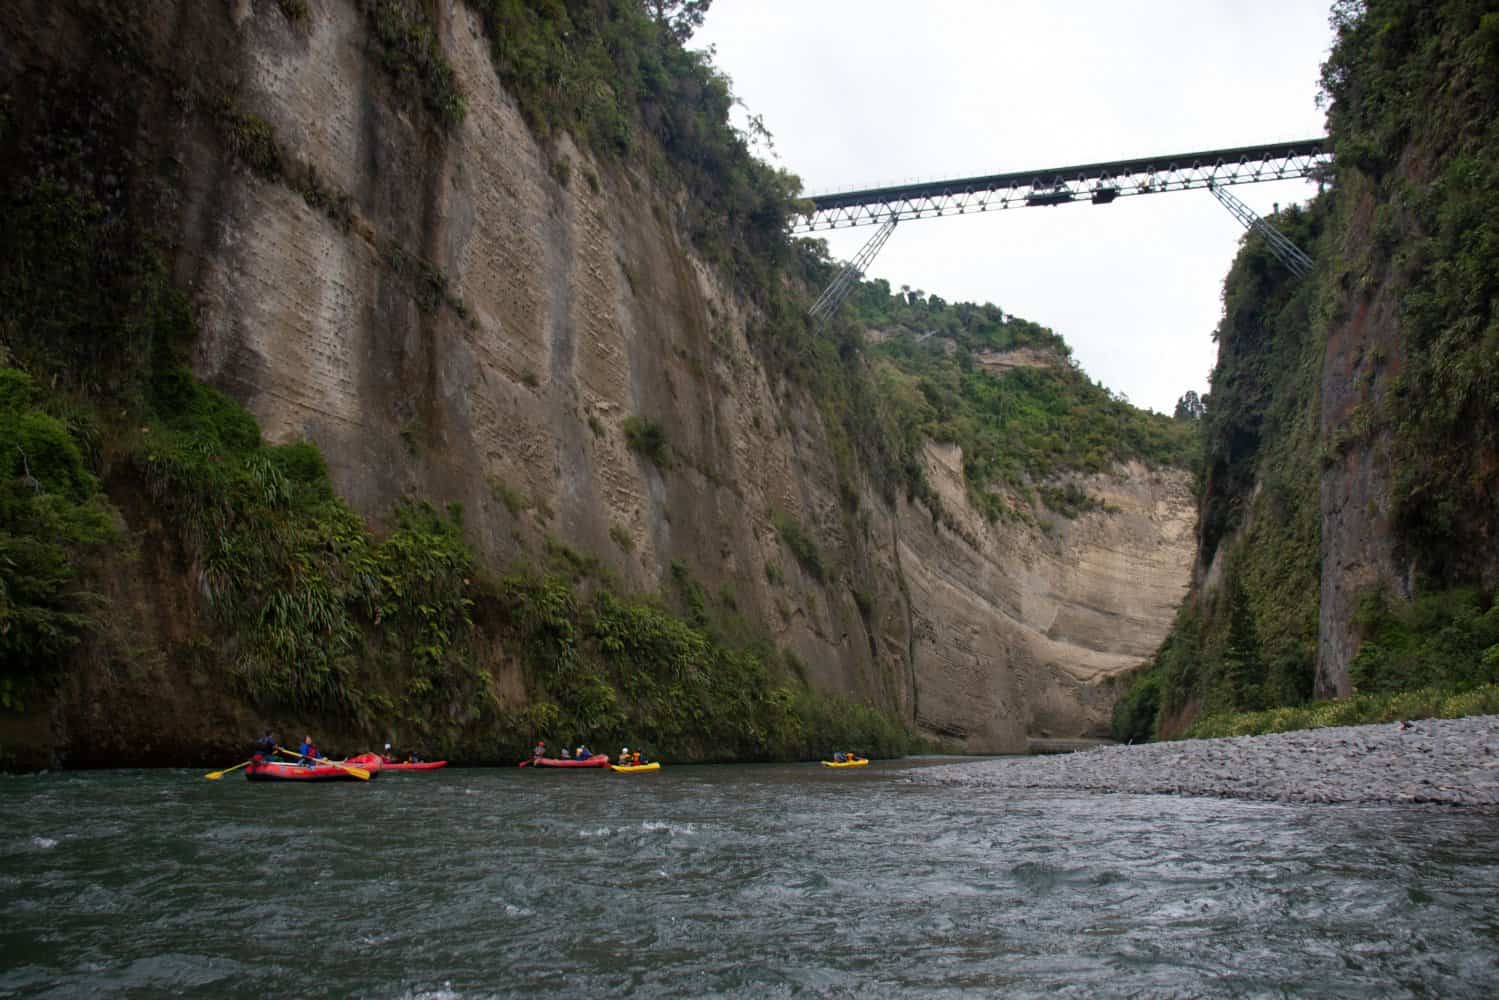 Luxury 2 Day Guided Rafting Trip on the Rangitikei River